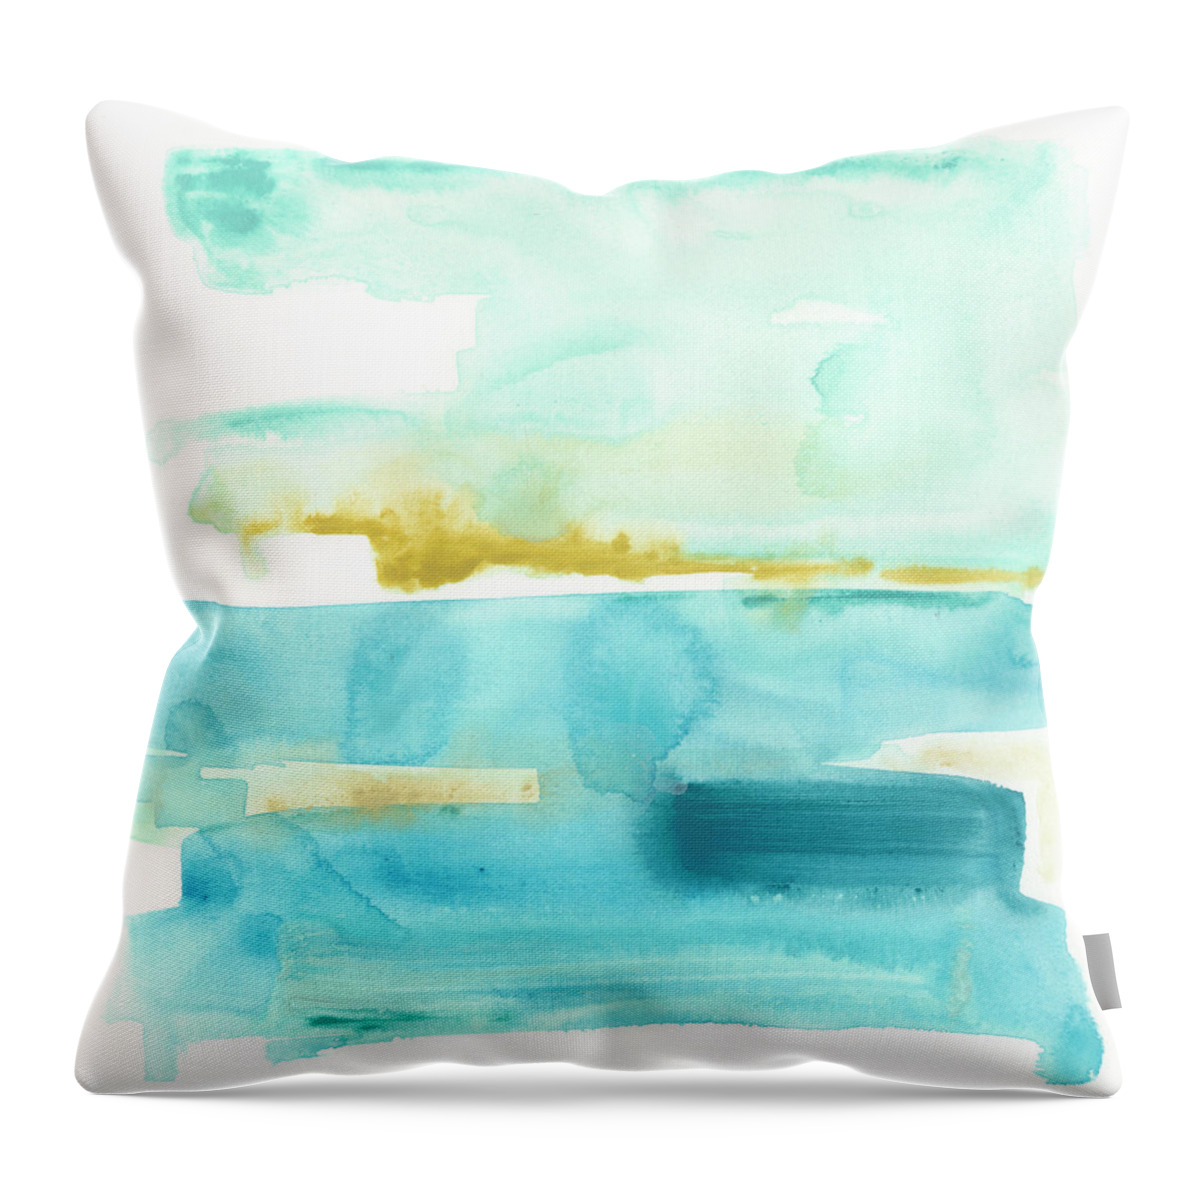 Landscapes Throw Pillow featuring the painting Liquid Shoreline V #1 by June Erica Vess